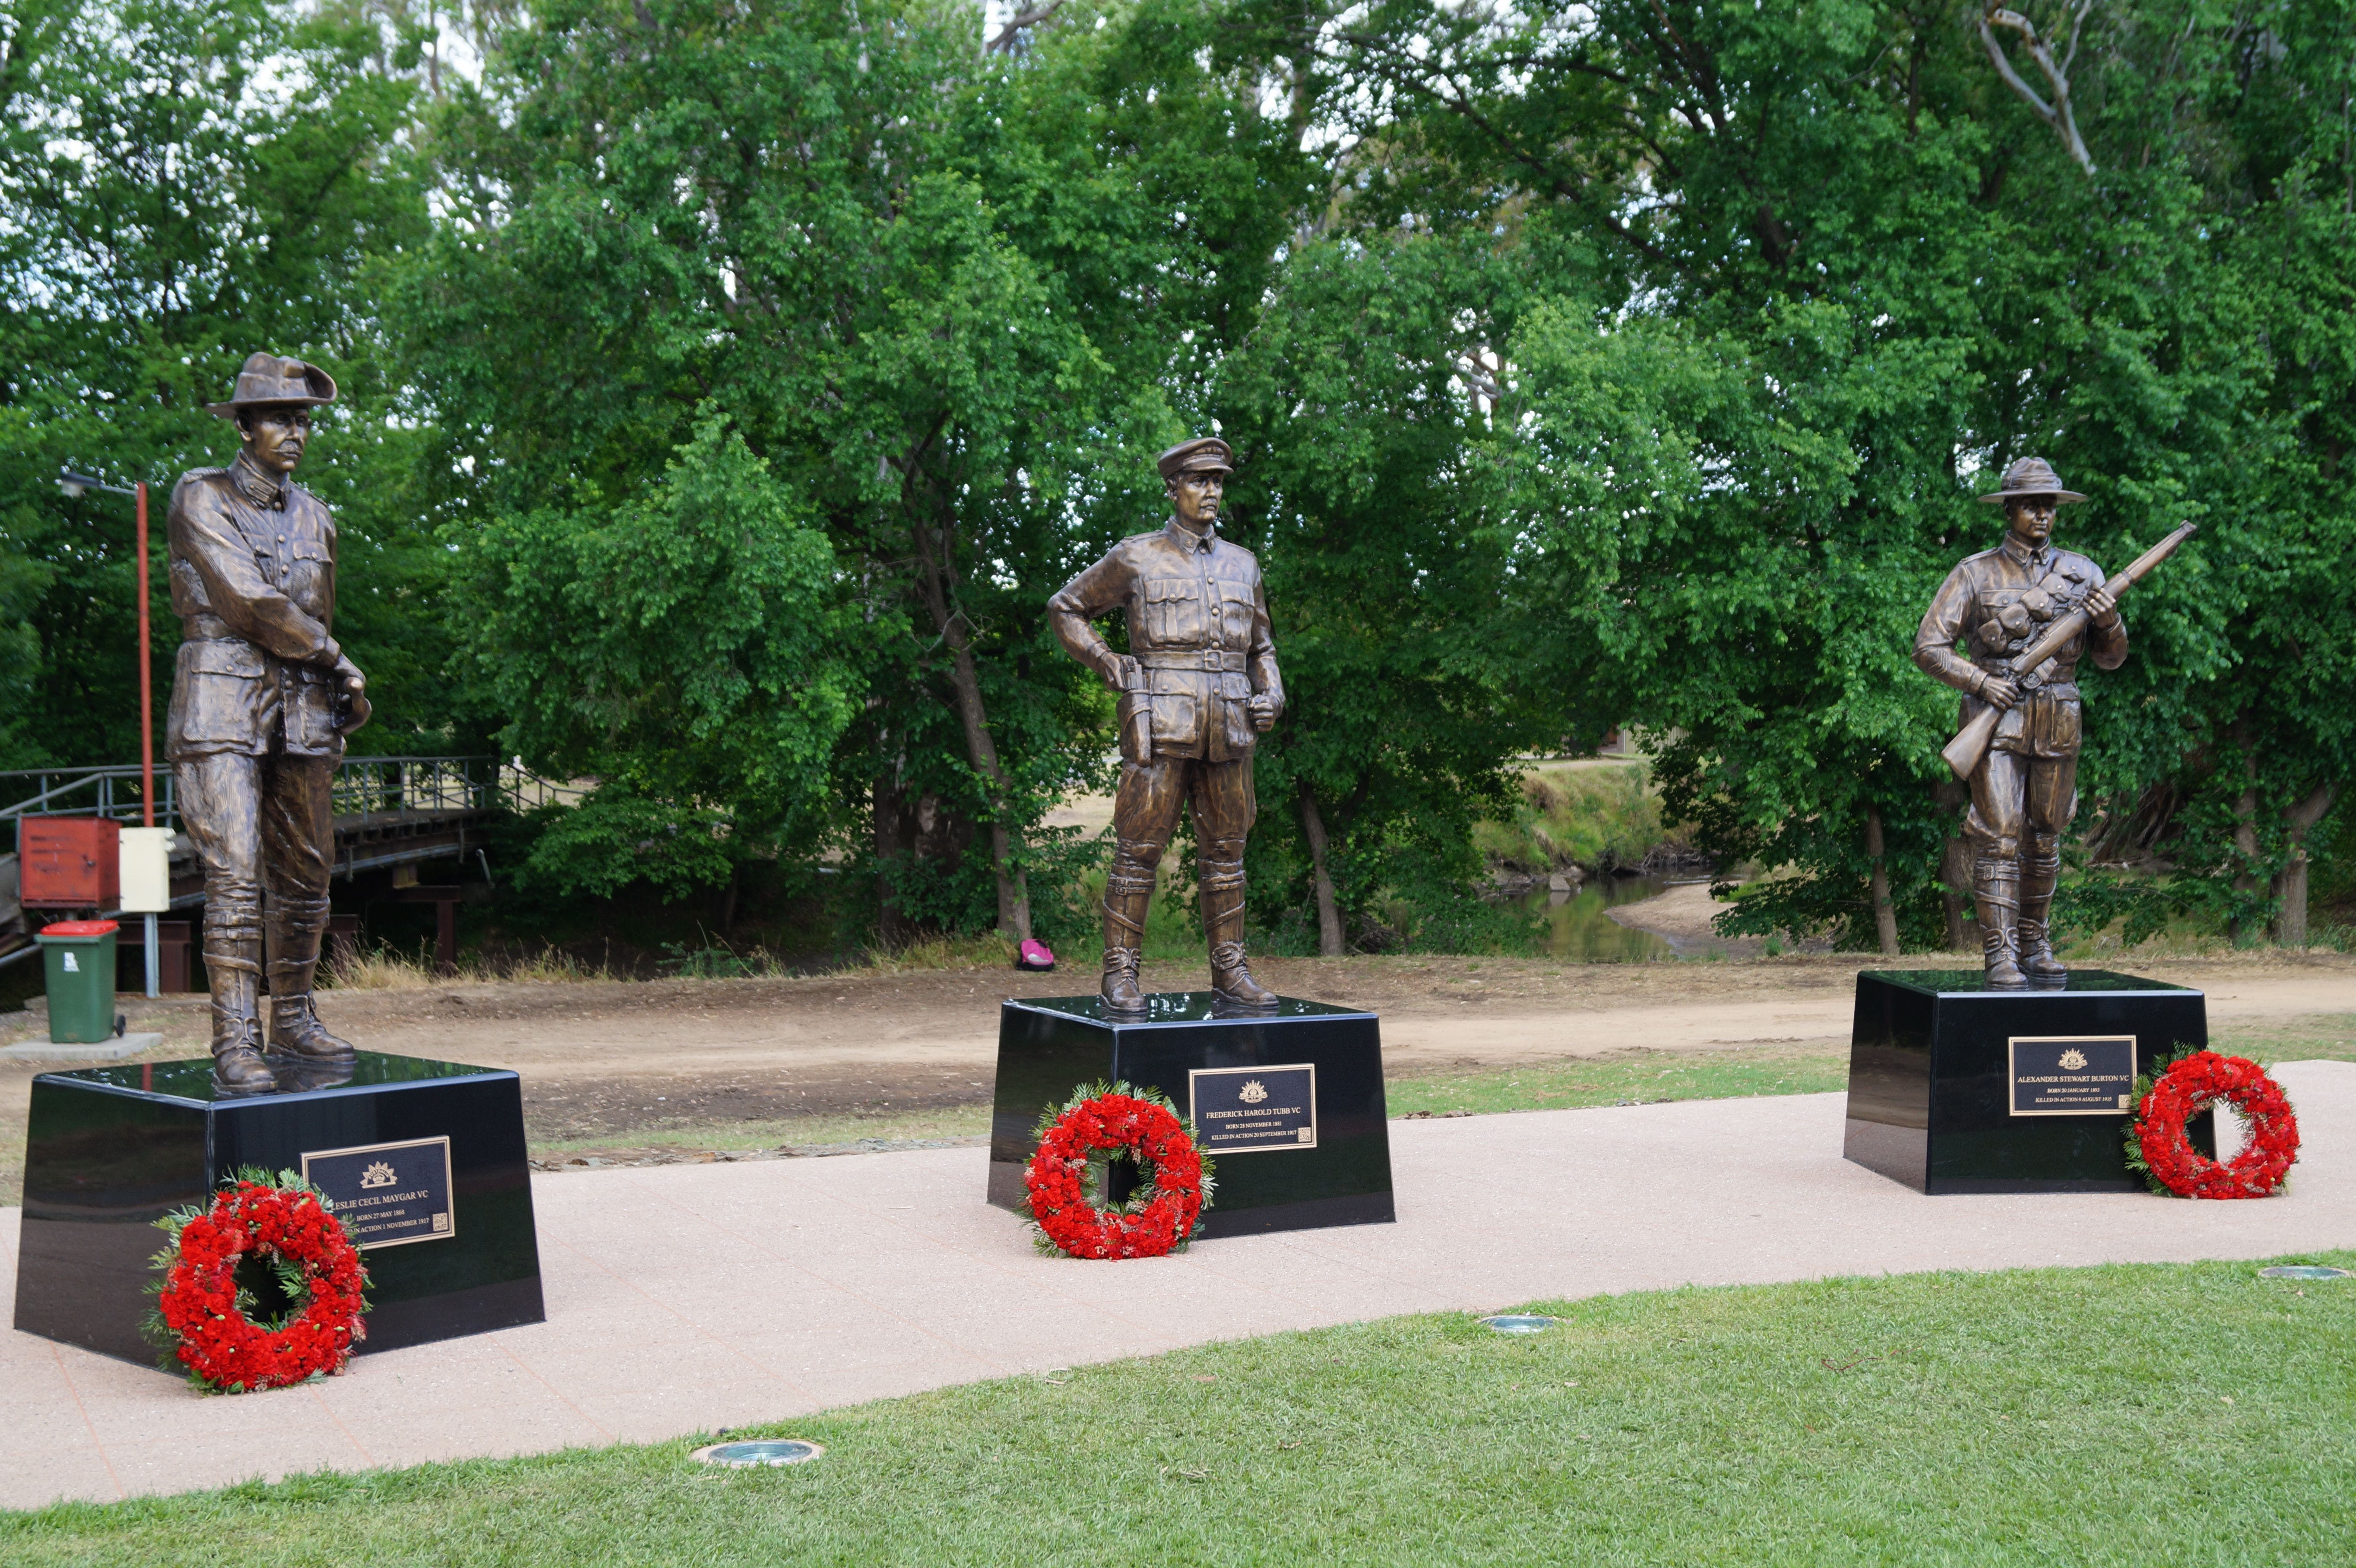 VC Memorial Park - Honouring Our Heroes - Tourism Adelaide